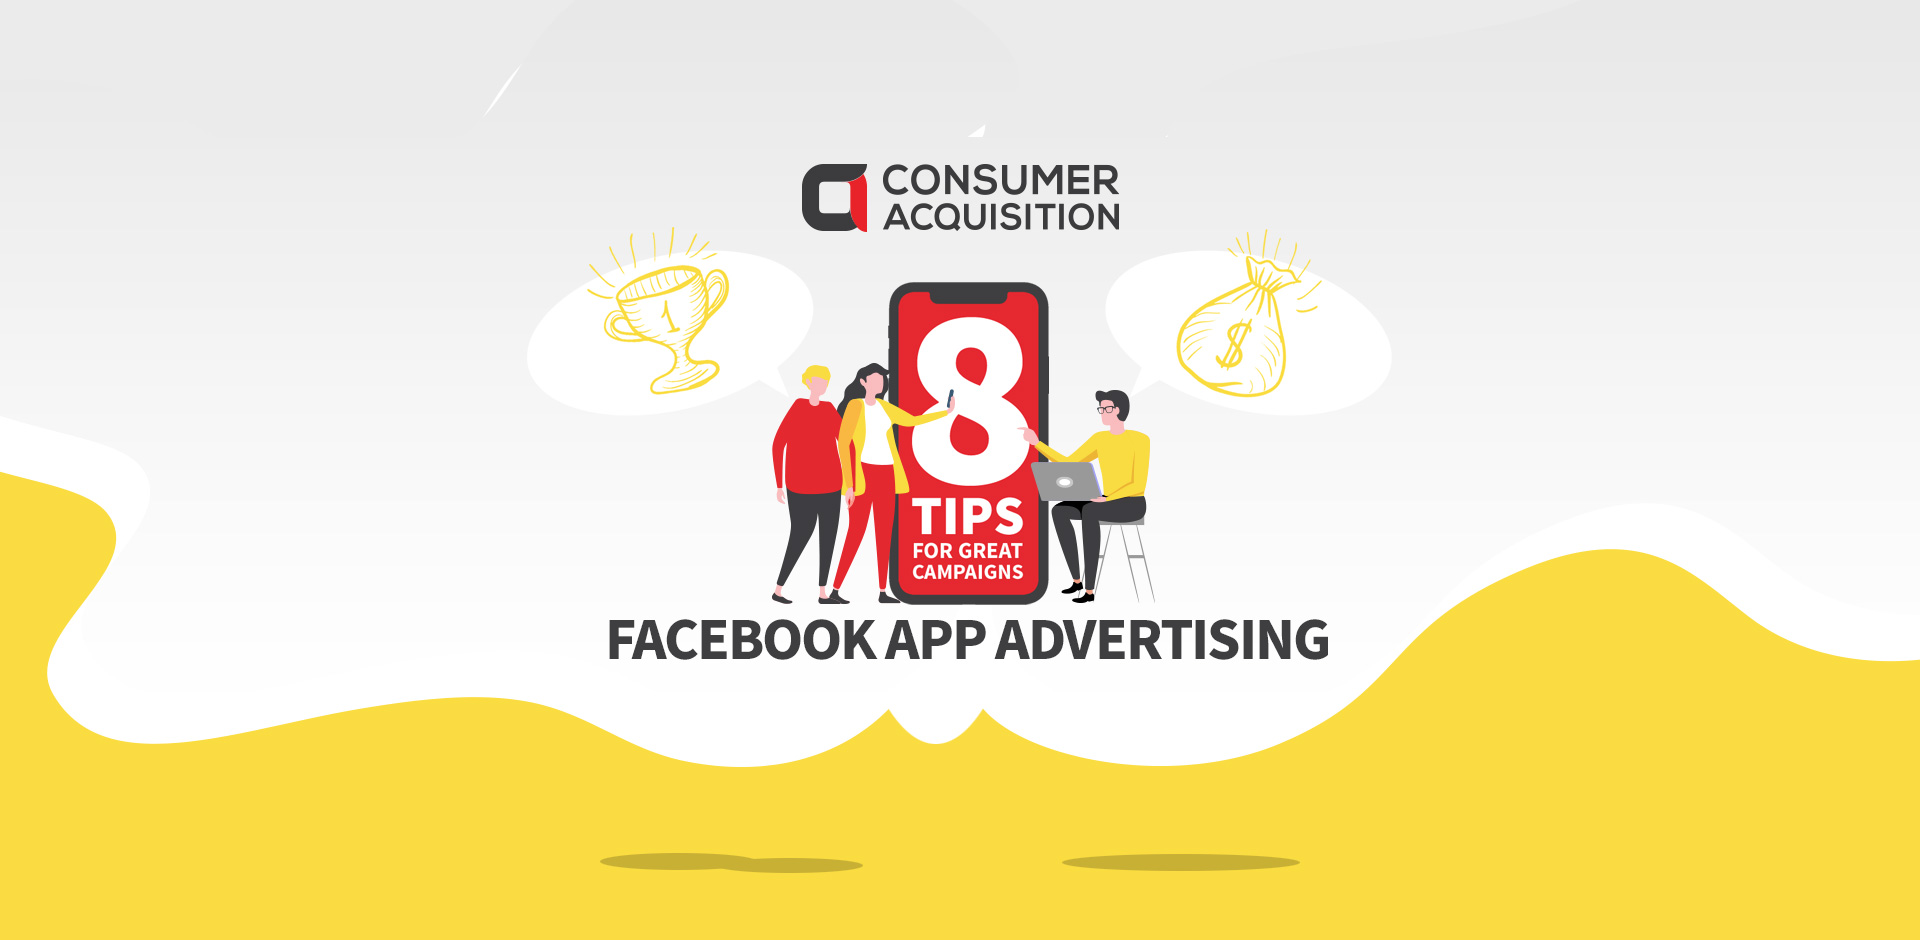 Facebook App Advertising: 8 Tips for Great Campaigns